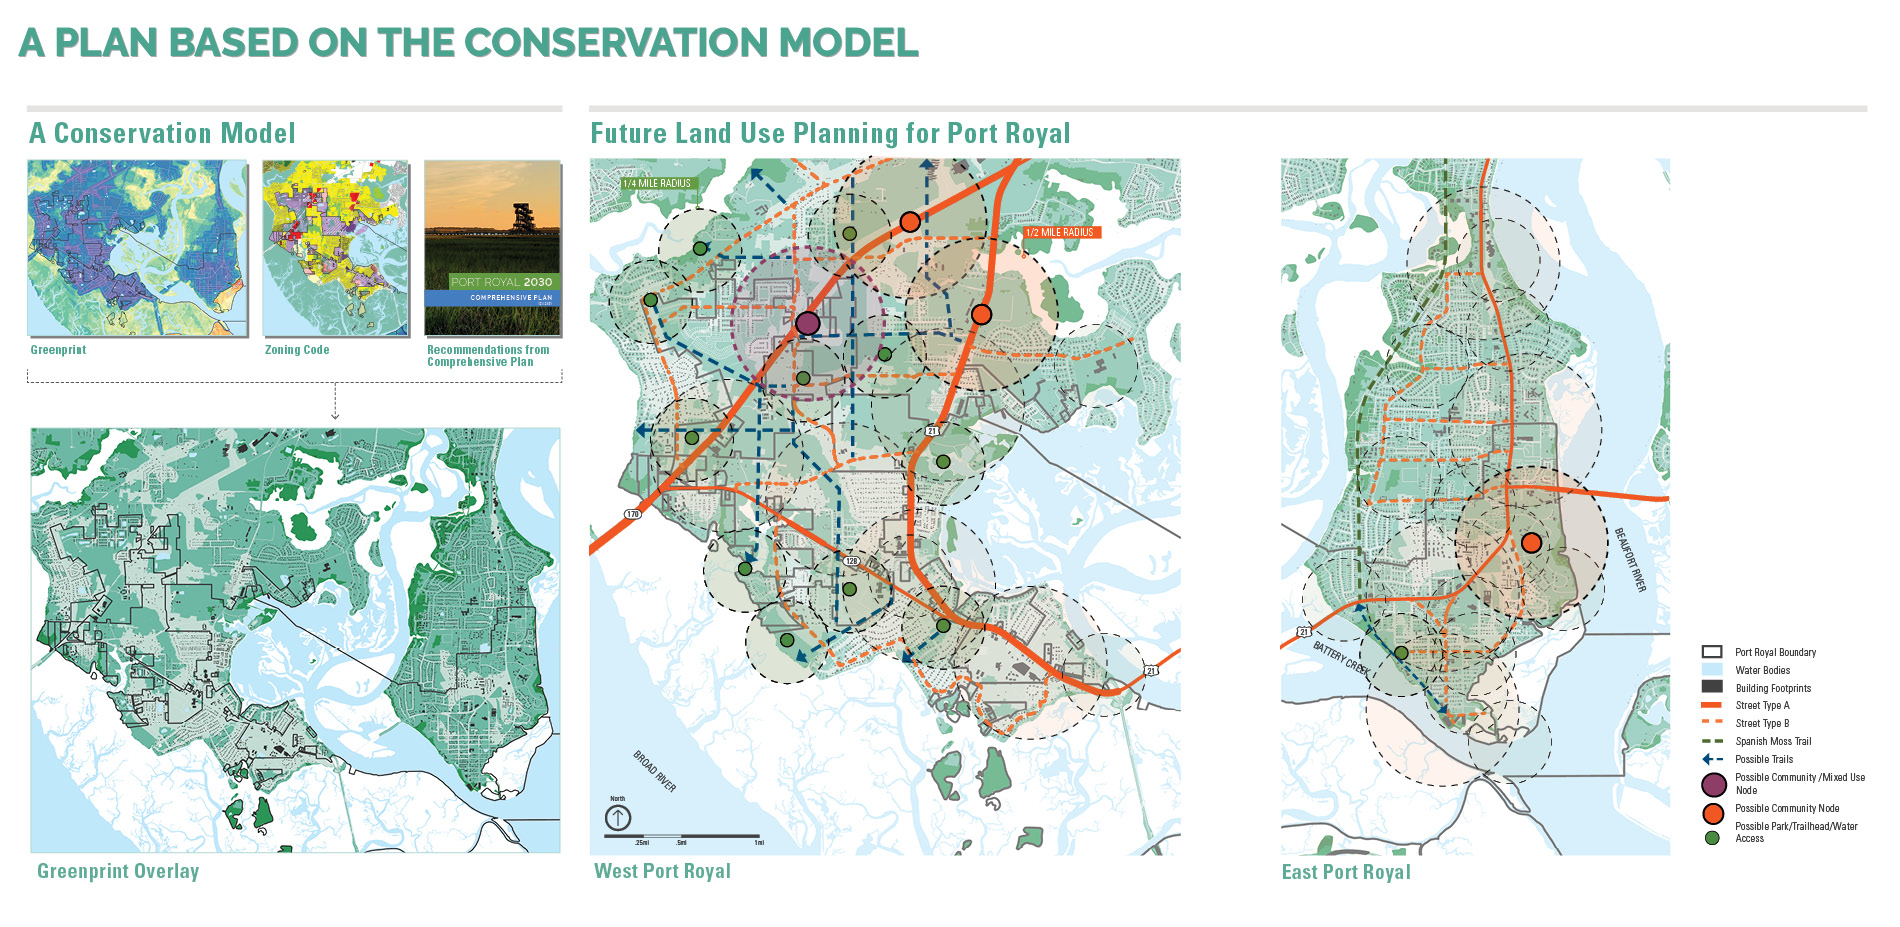 A Plan Based on the Conservation Model